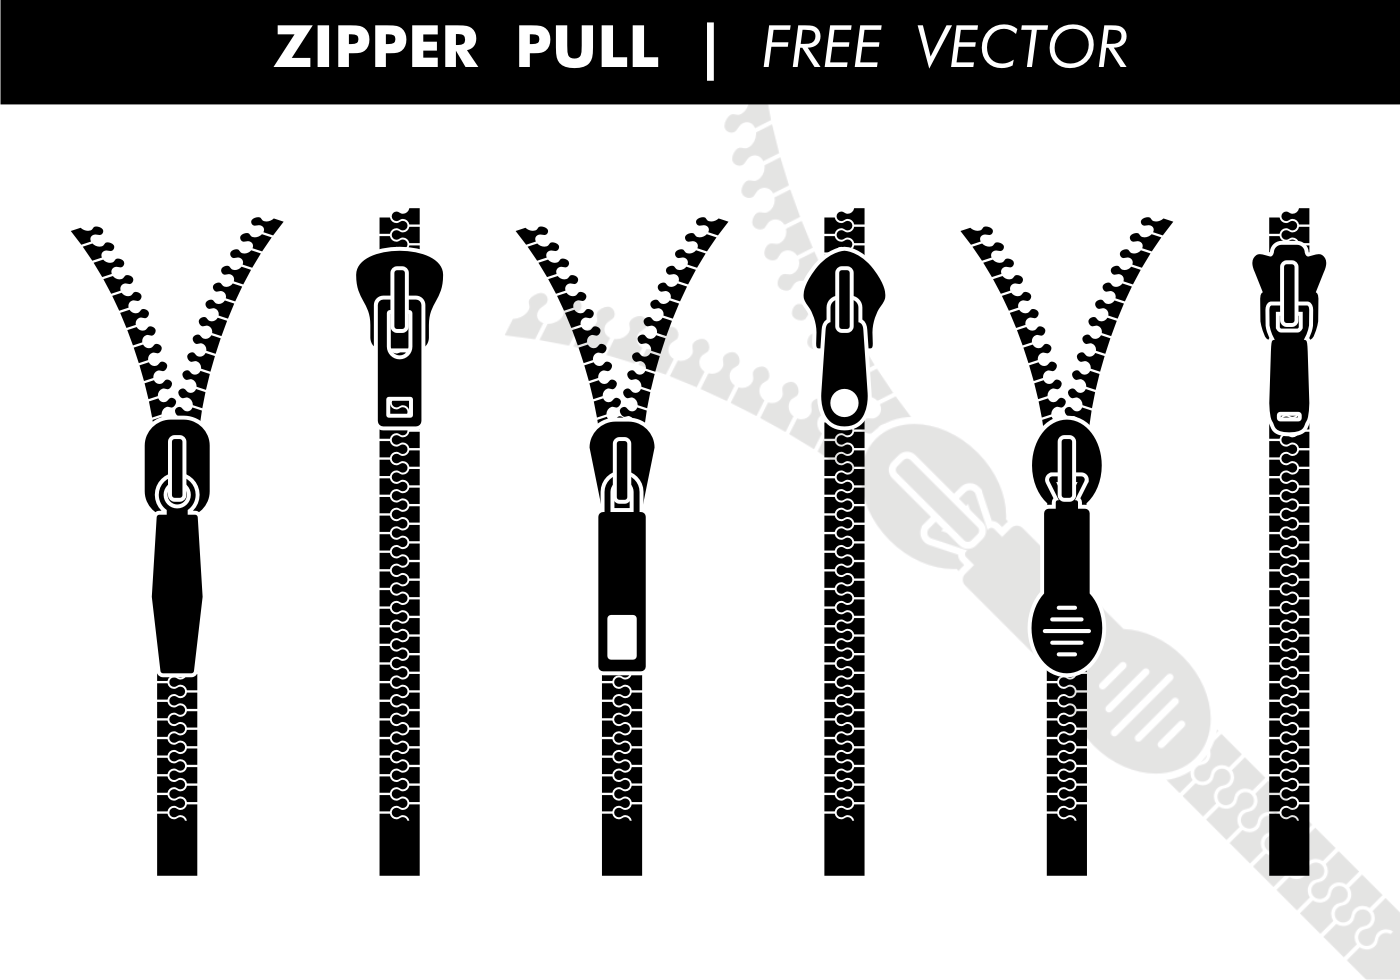 Amazing Zipper Pictures & Backgrounds